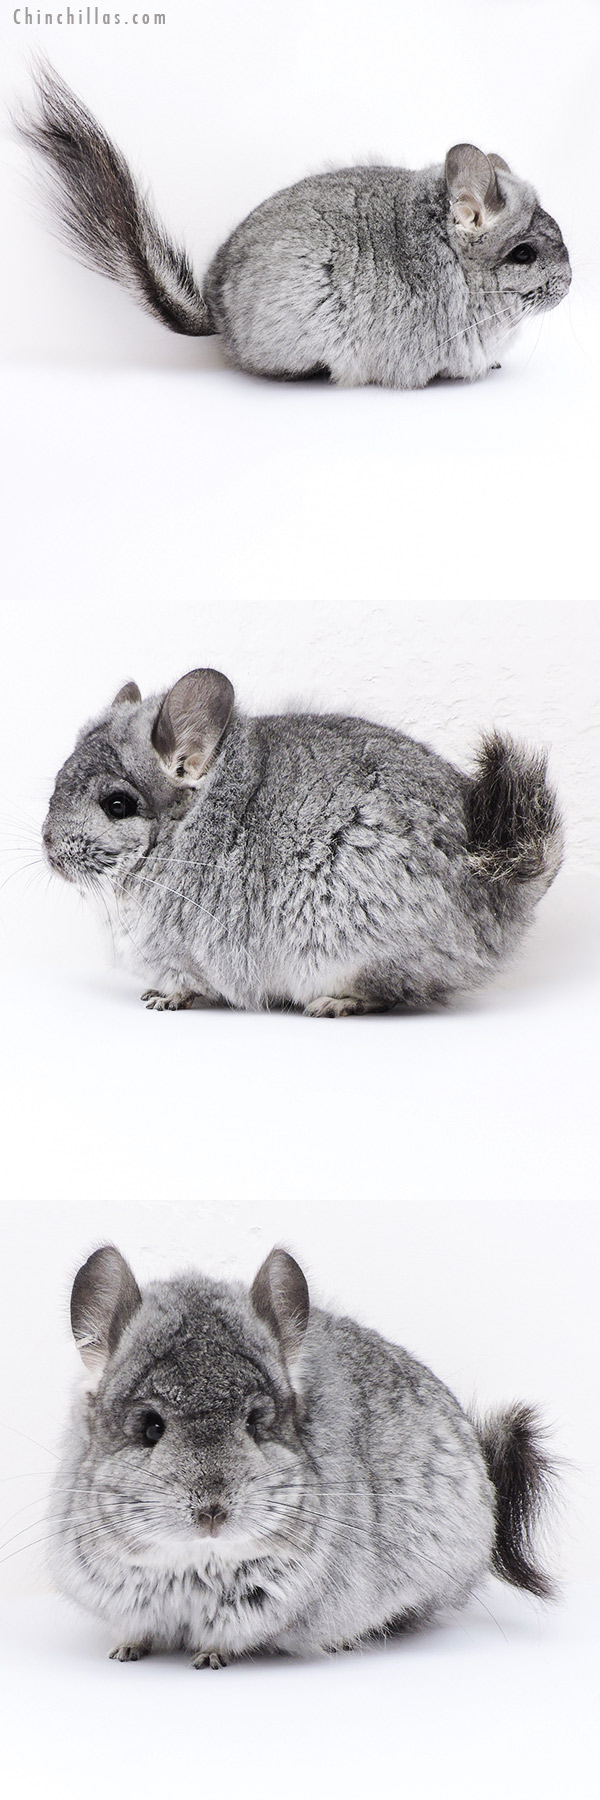 Chinchilla or related item offered for sale or export on Chinchillas.com - 18095 Large Blocky Standard  Royal Persian Angora Female Chinchilla